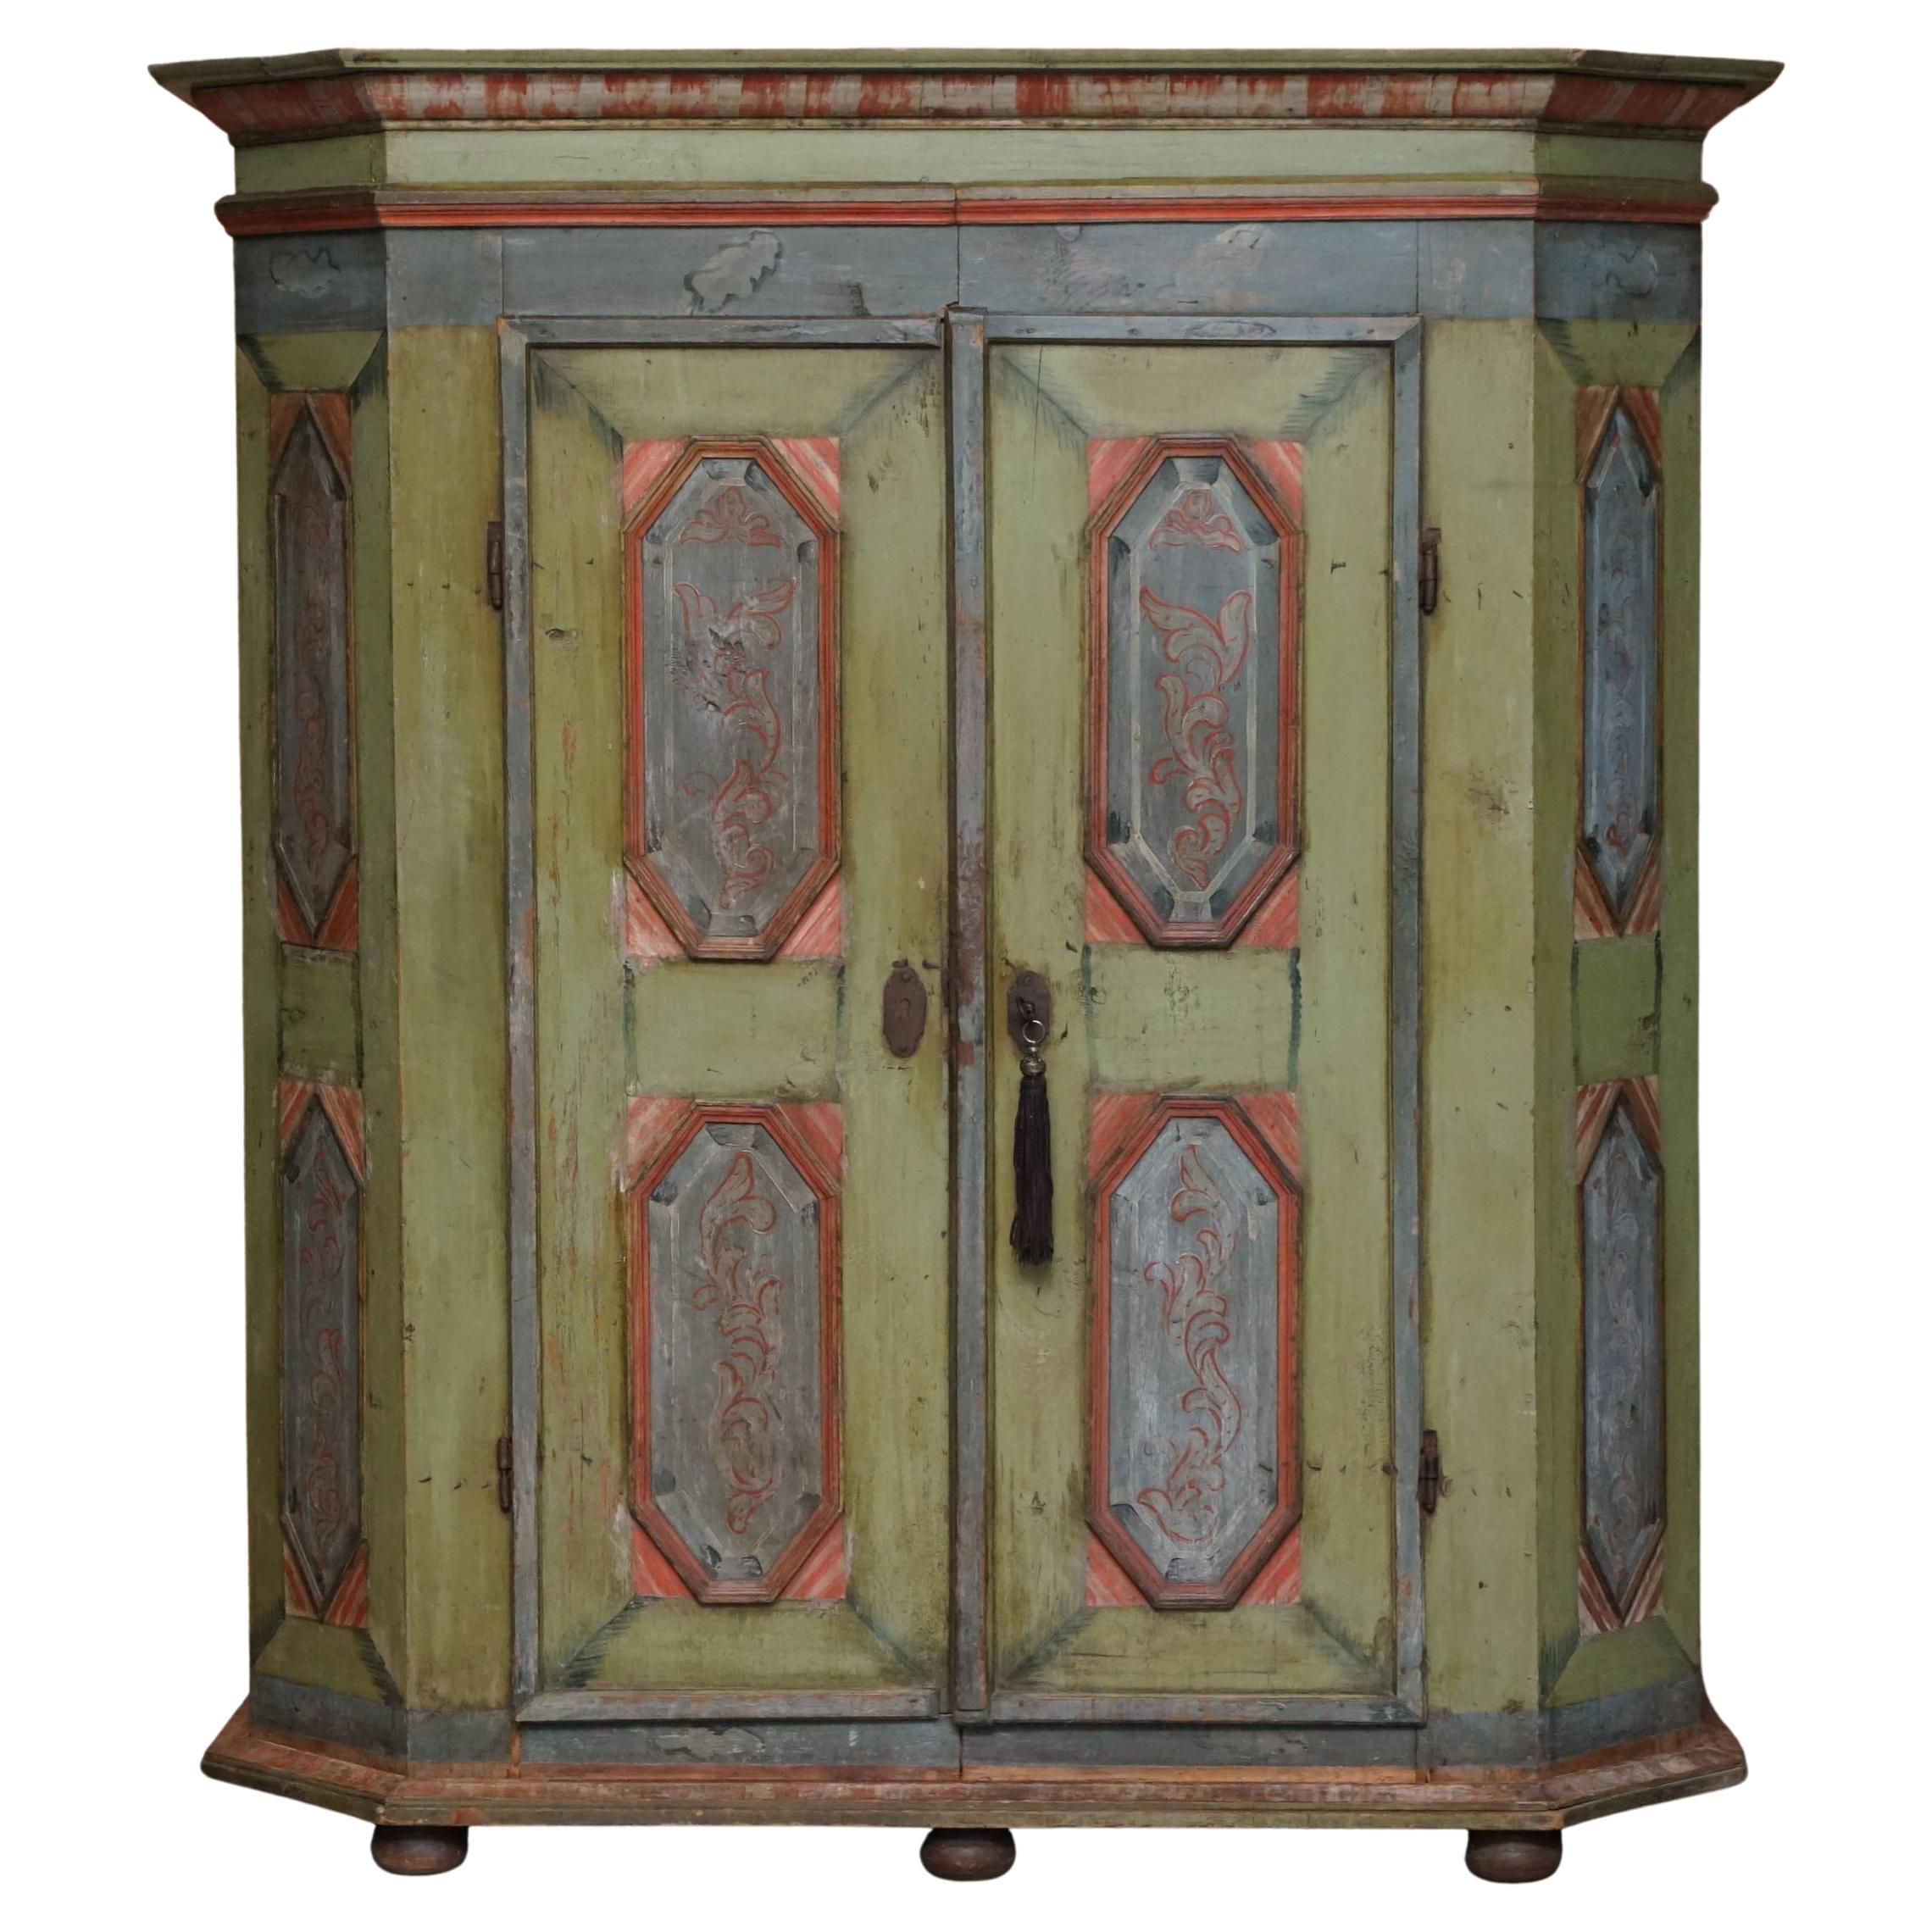 circa 1800 Sublime Hand Painted European Wardrobe or House Cupboard in Solid Oak